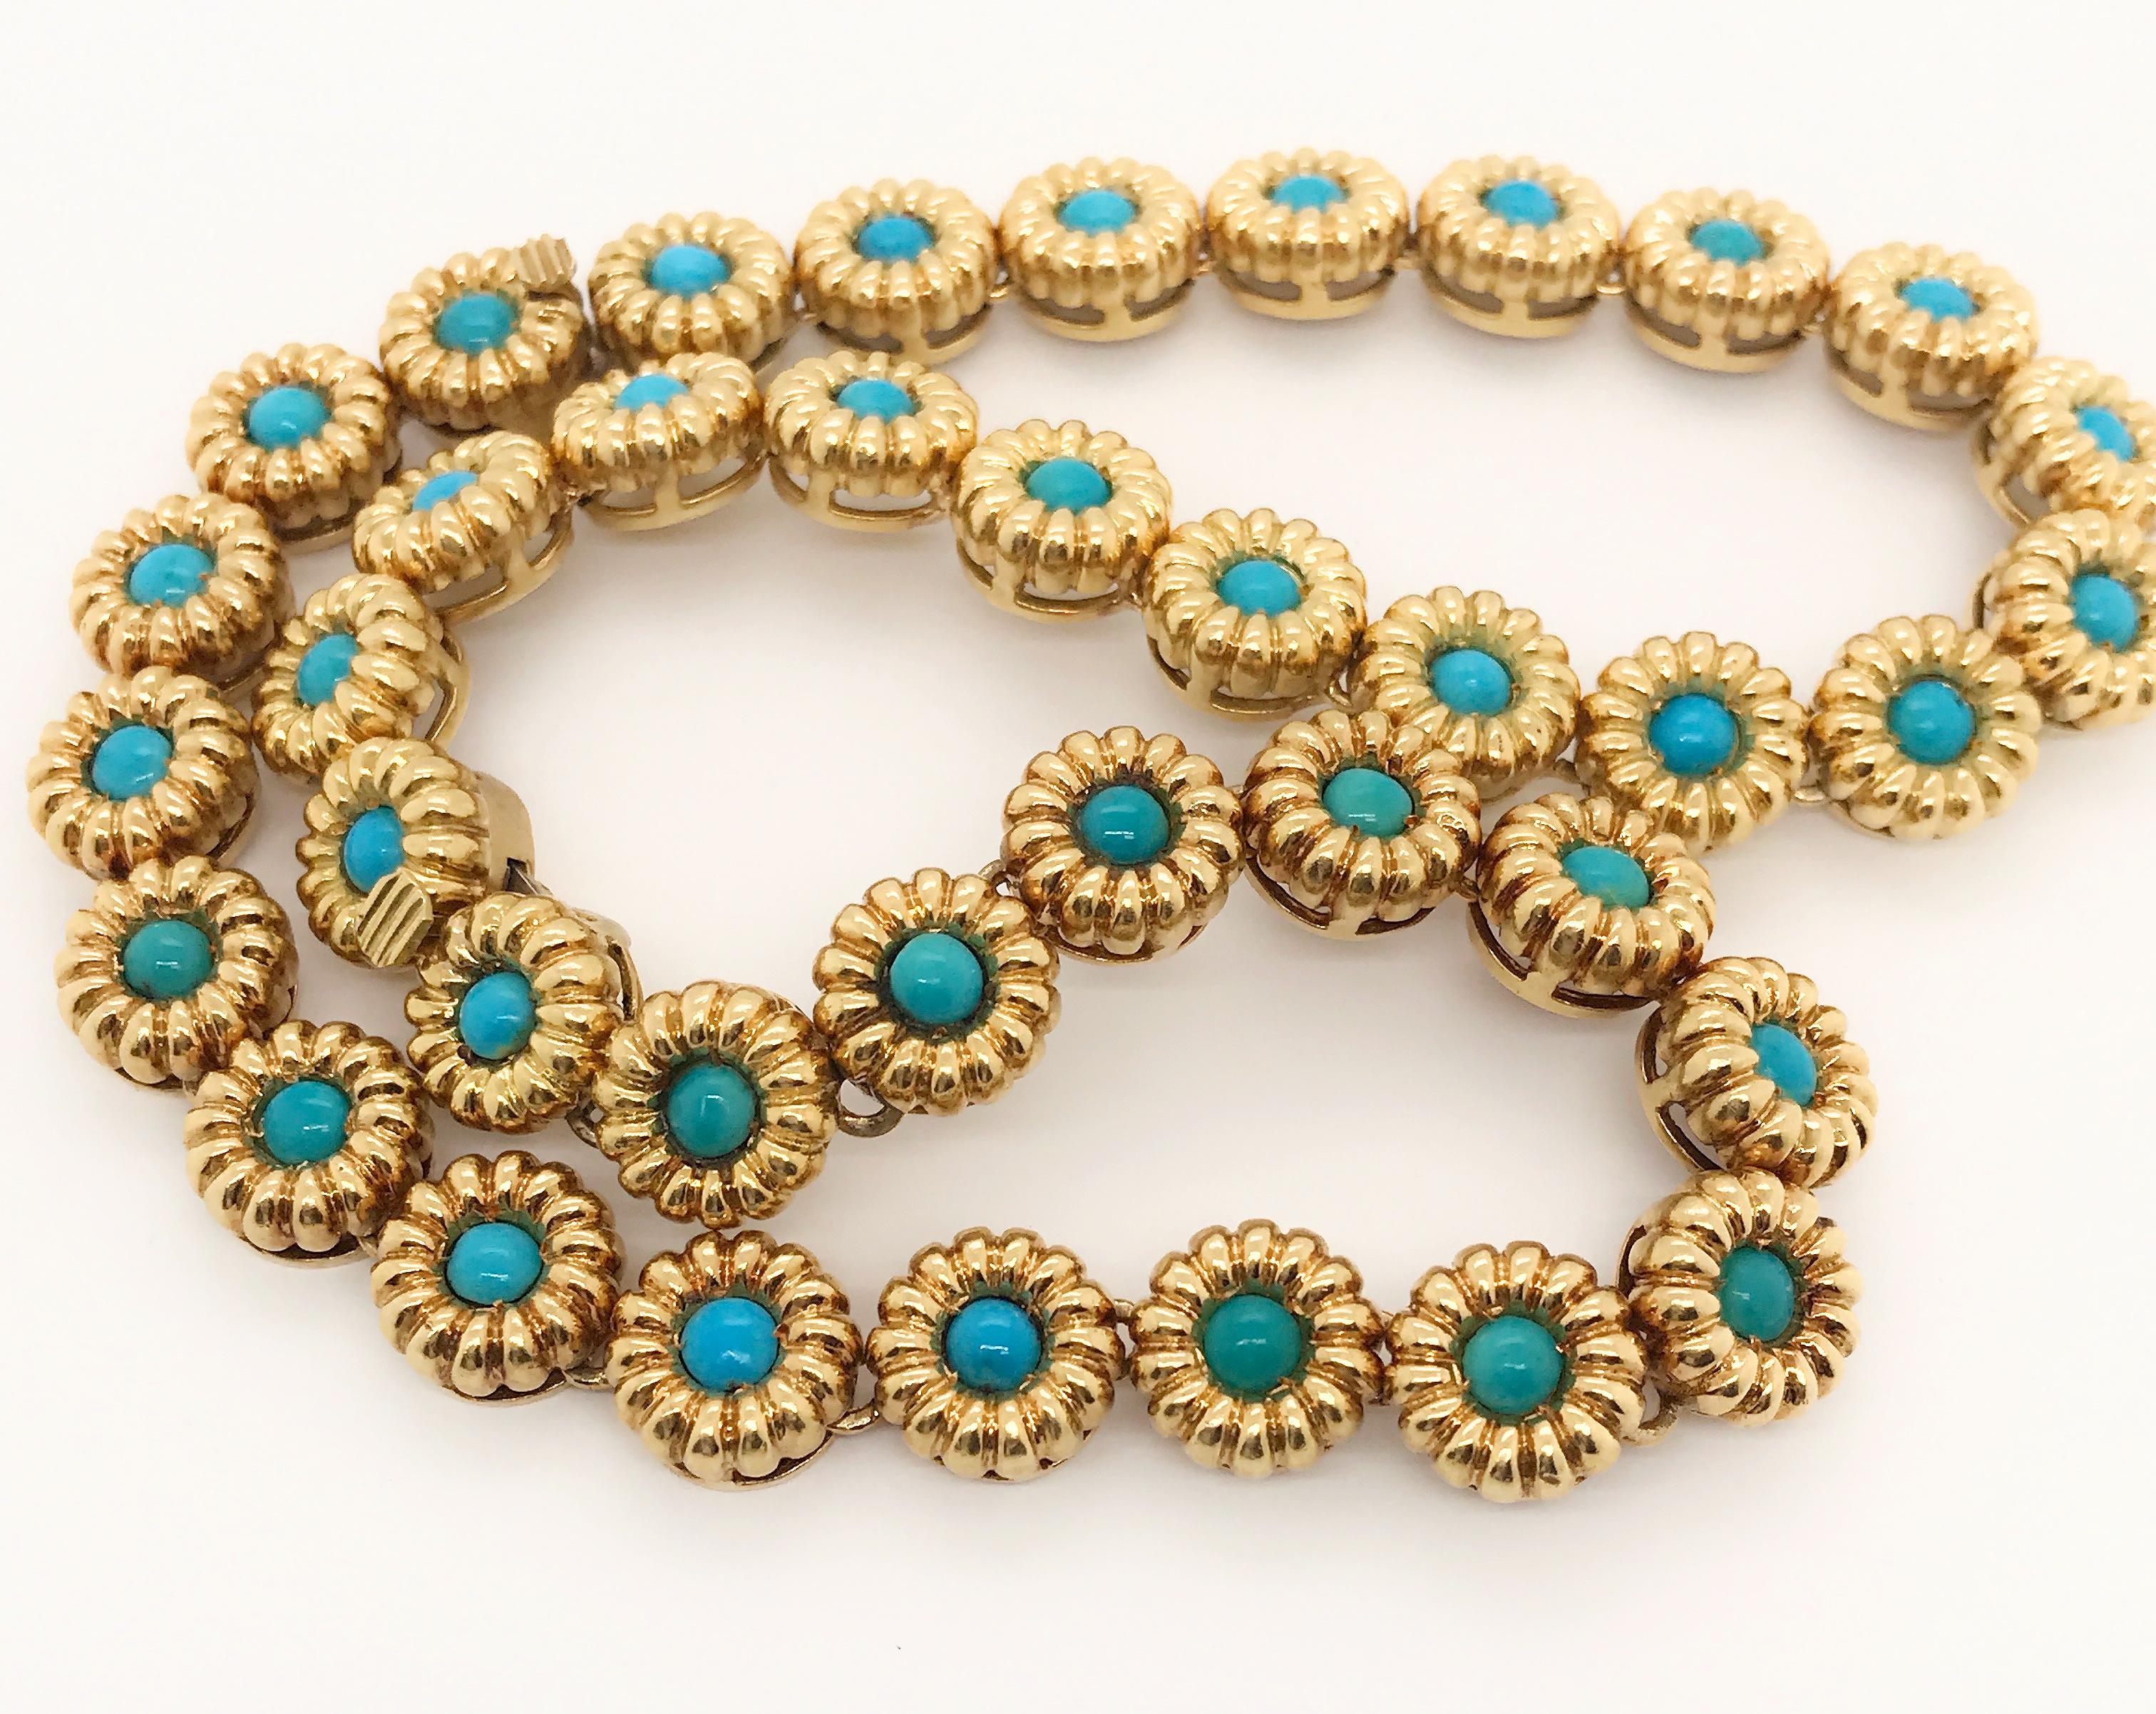 18 Karat Yellow Gold Turquoise Bracelets or Choker Necklace For Sale 9